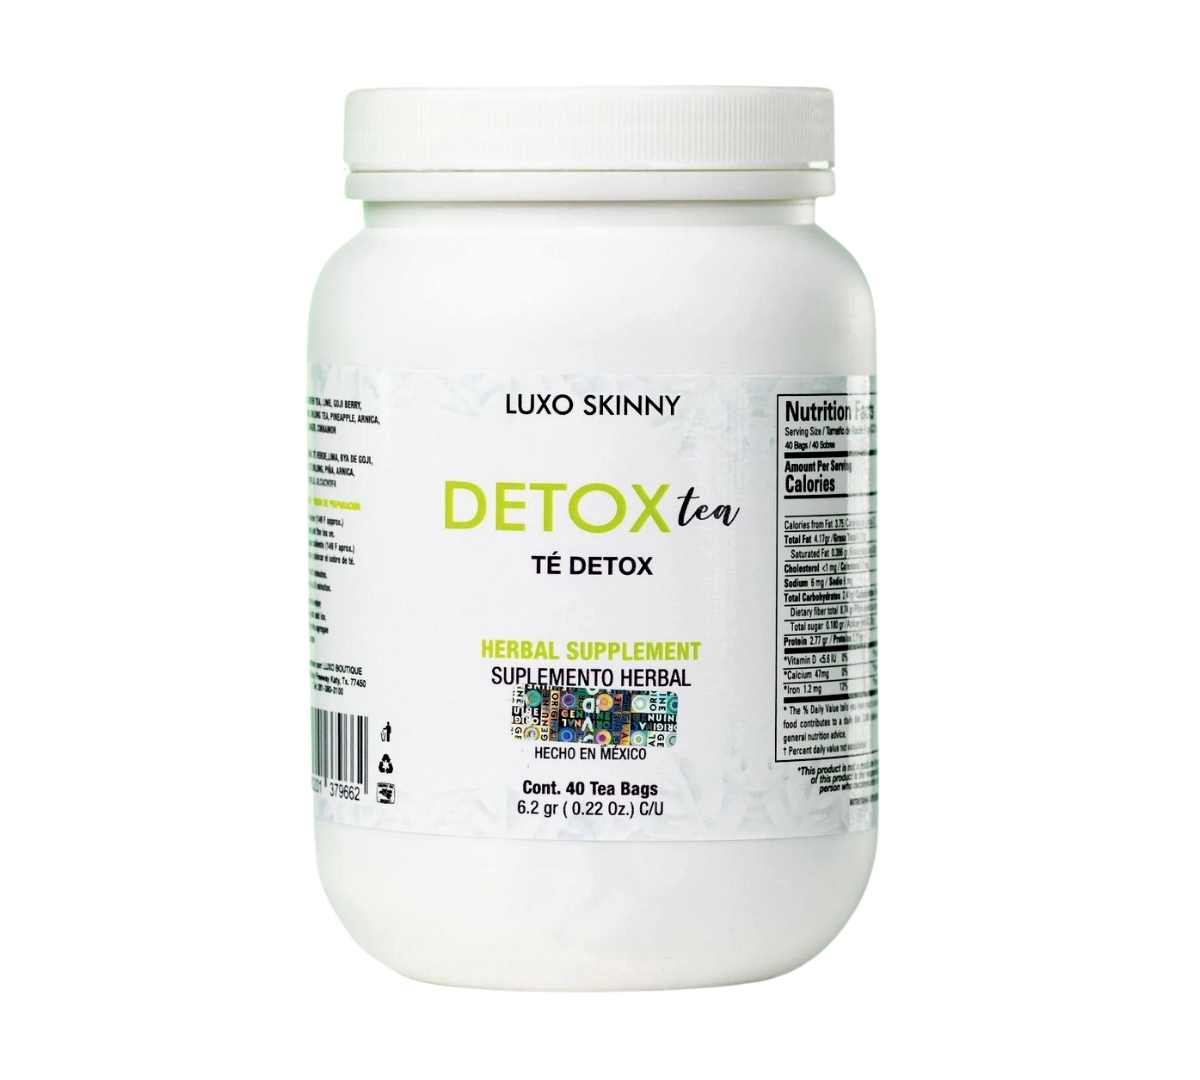 Luxo detox tea and what it is for